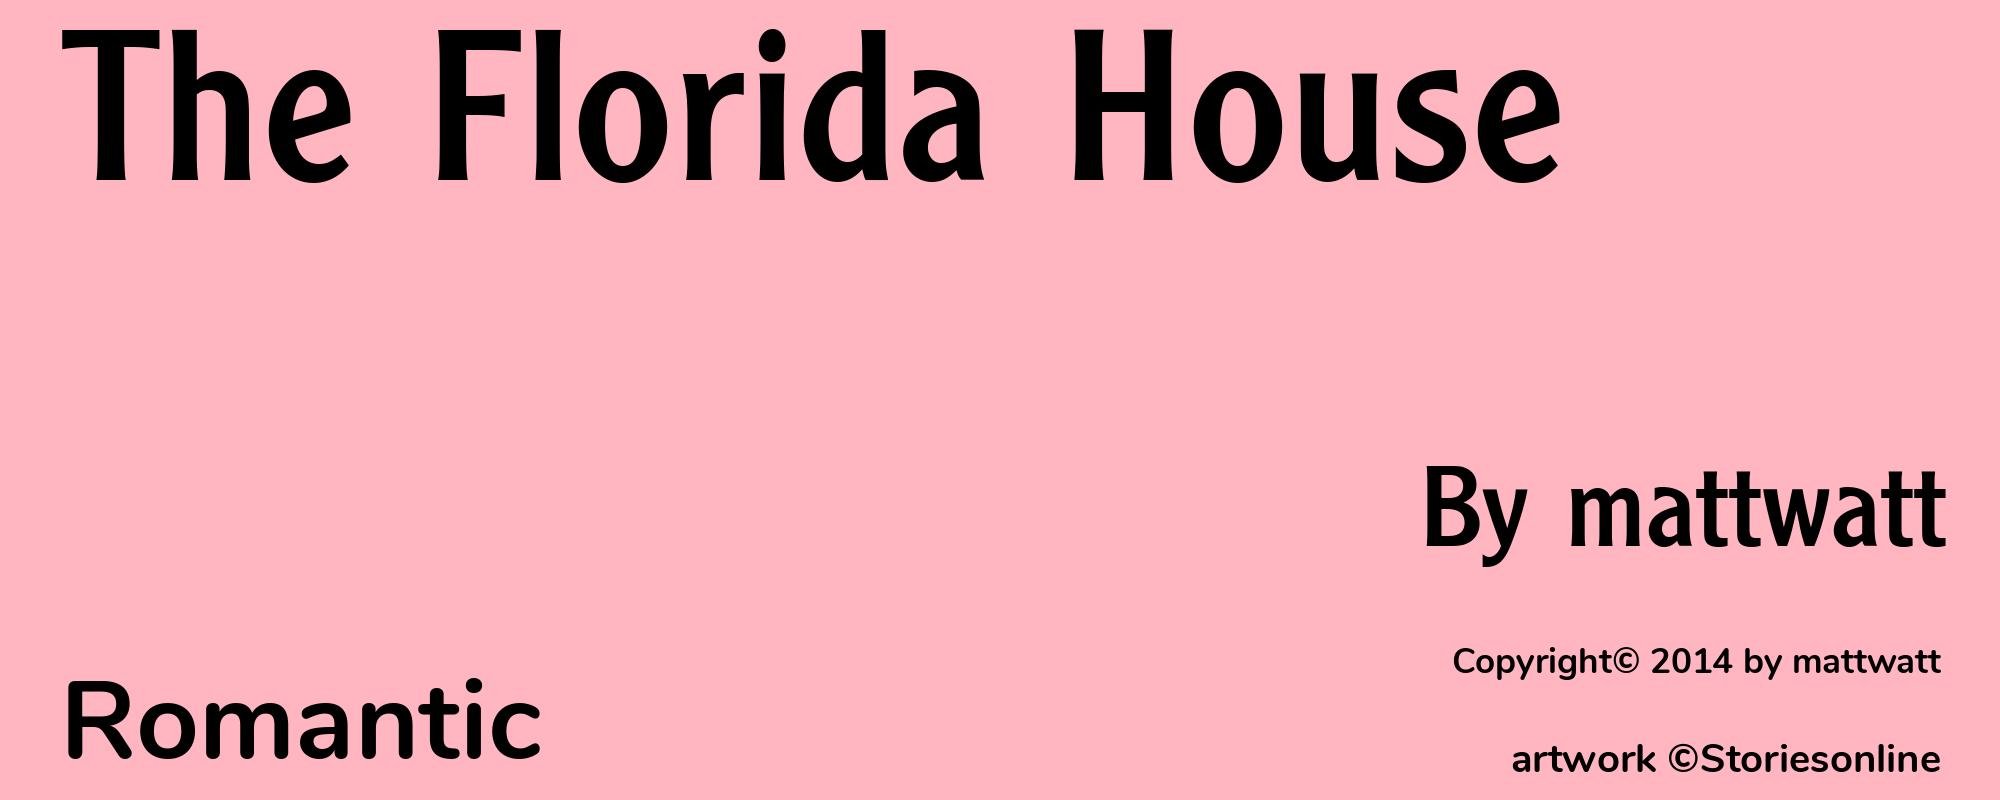 The Florida House - Cover